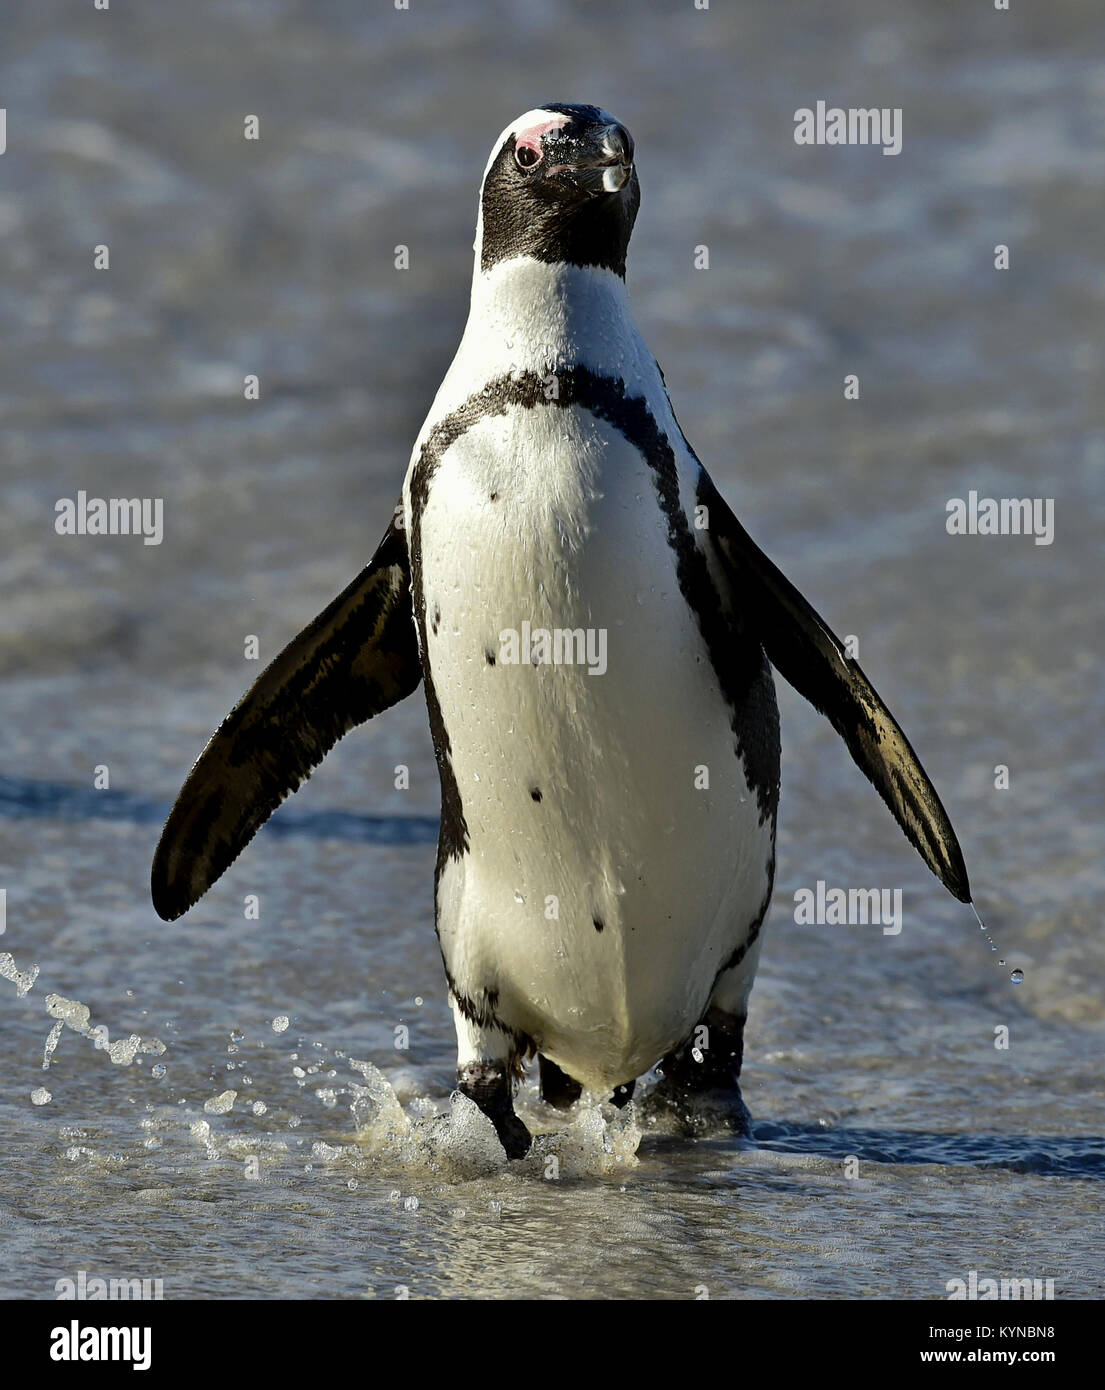 African penguin (Spheniscus demersus) on the beach, Western Cape, South Africa Stock Photo